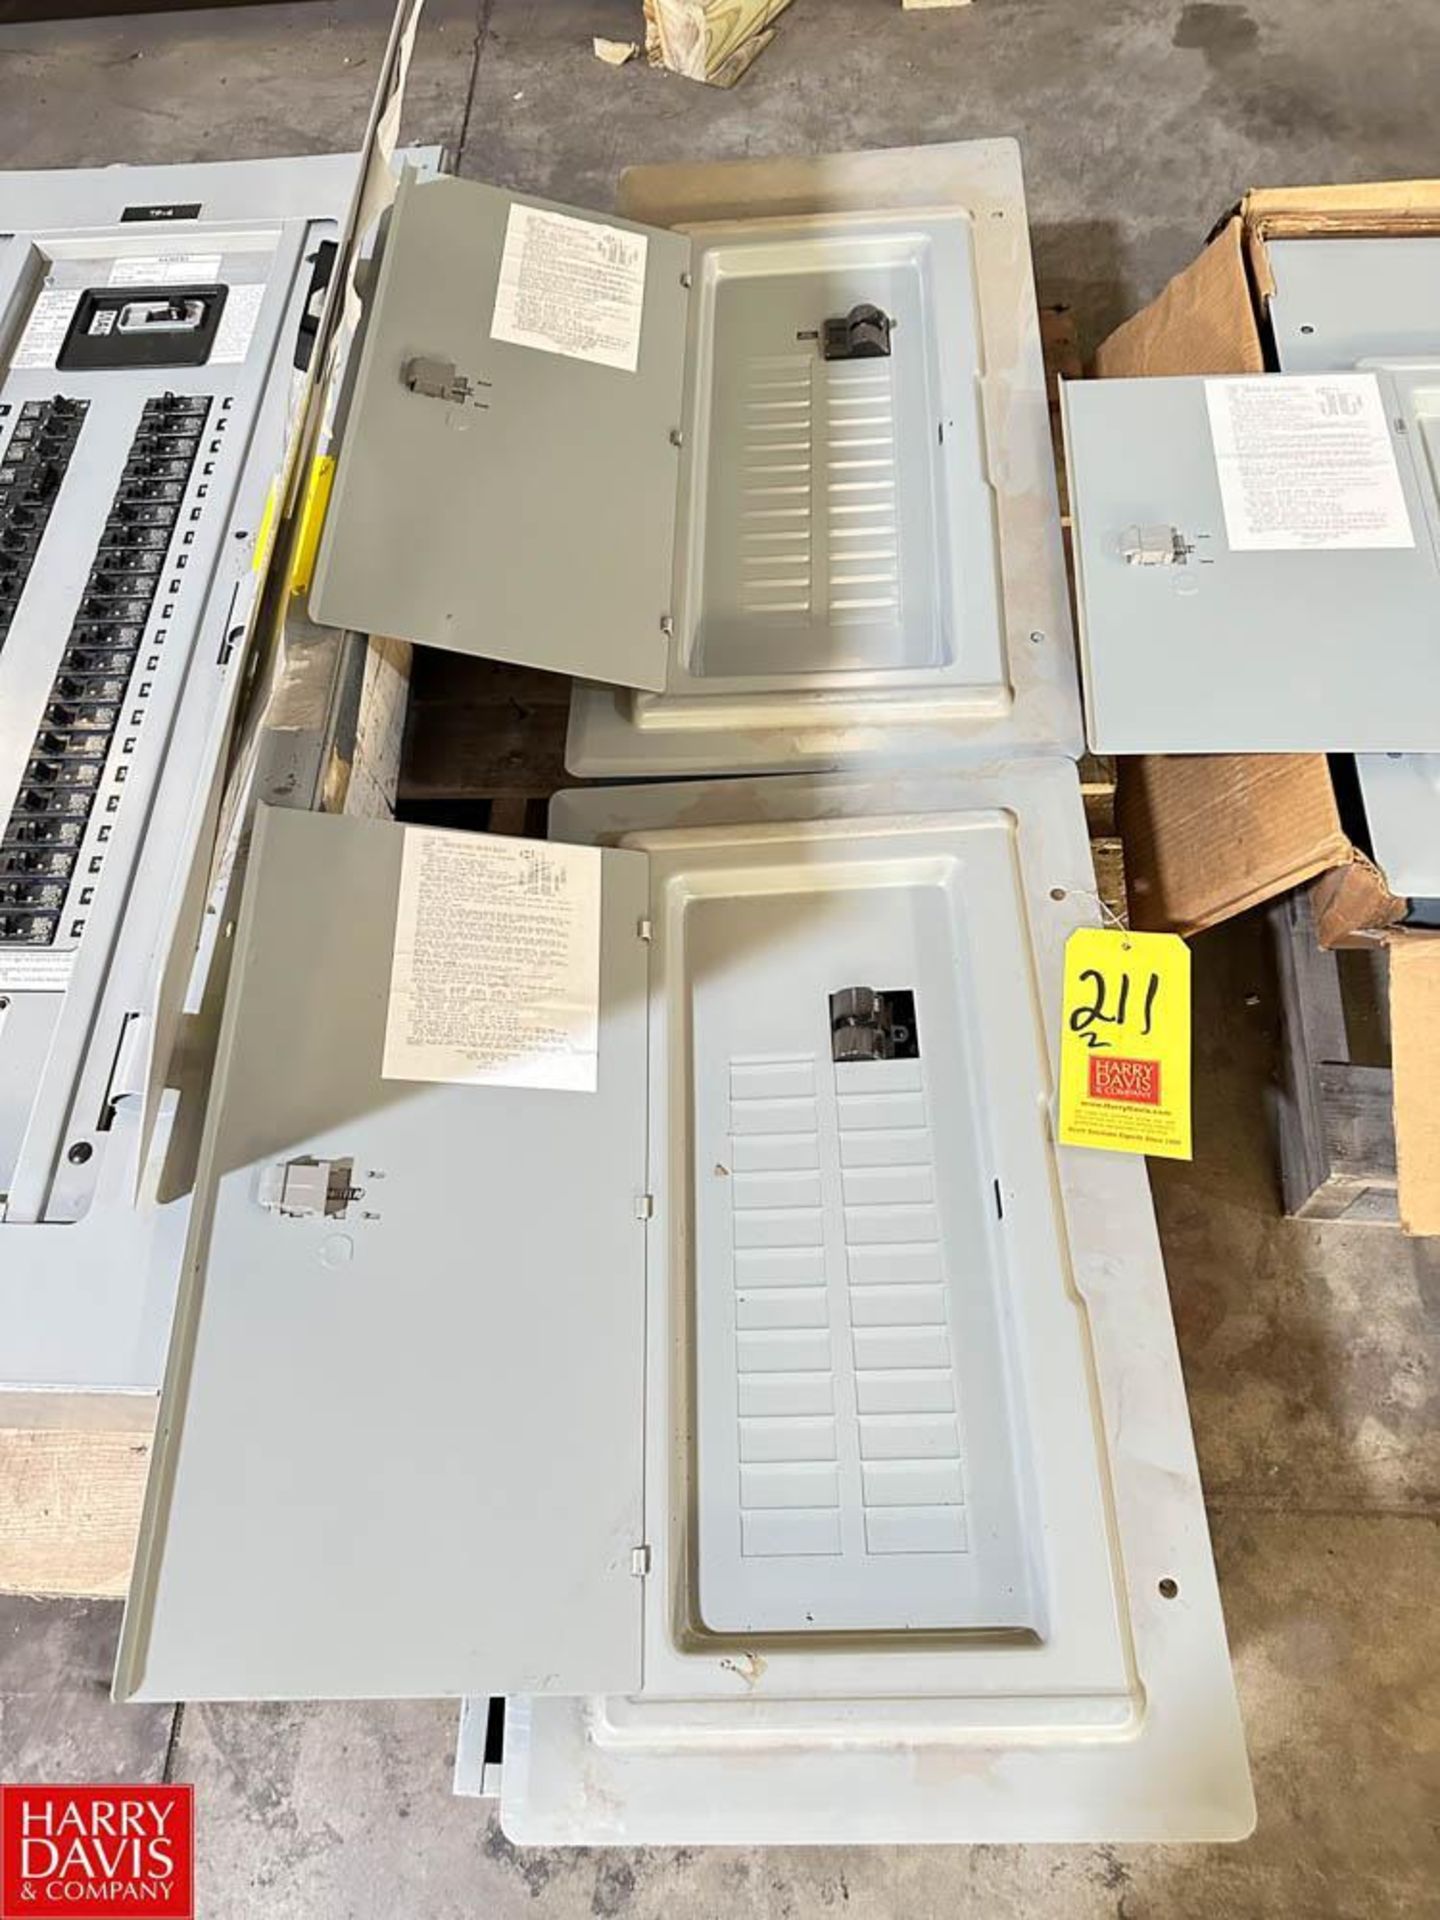 Crouse-Hinds 200 AMP and 150 AMP Breaker Panels